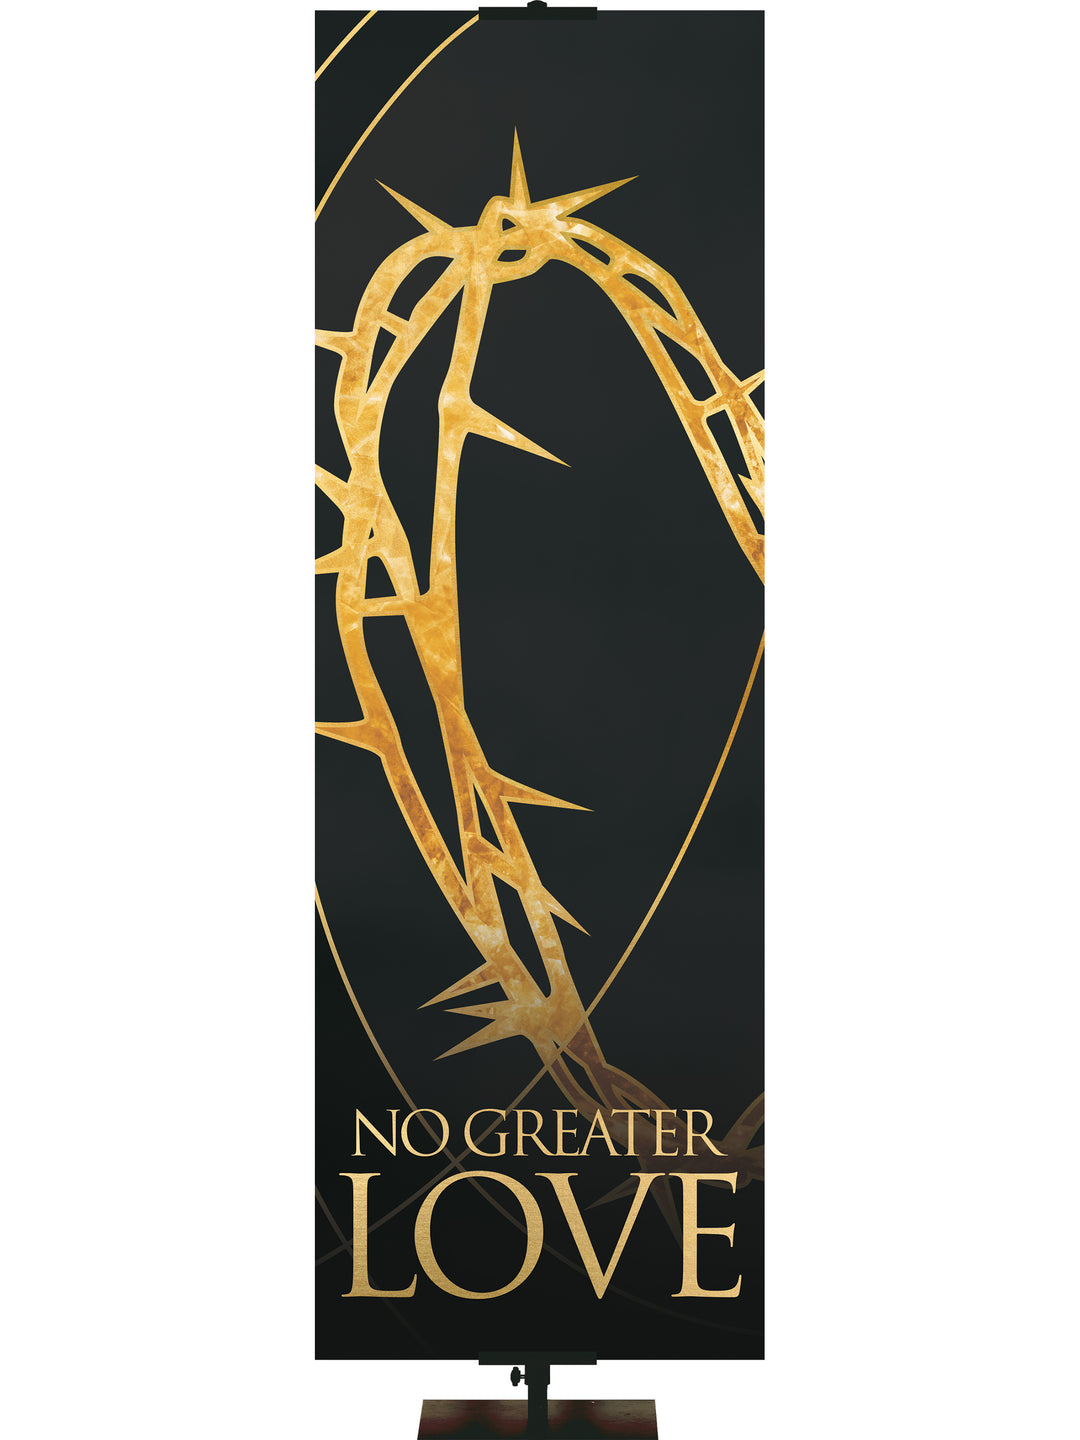 Easter Liturgy No Greater Love with Gold Crown of Thorns and gold accents on Black Banner in thin format and left orientation